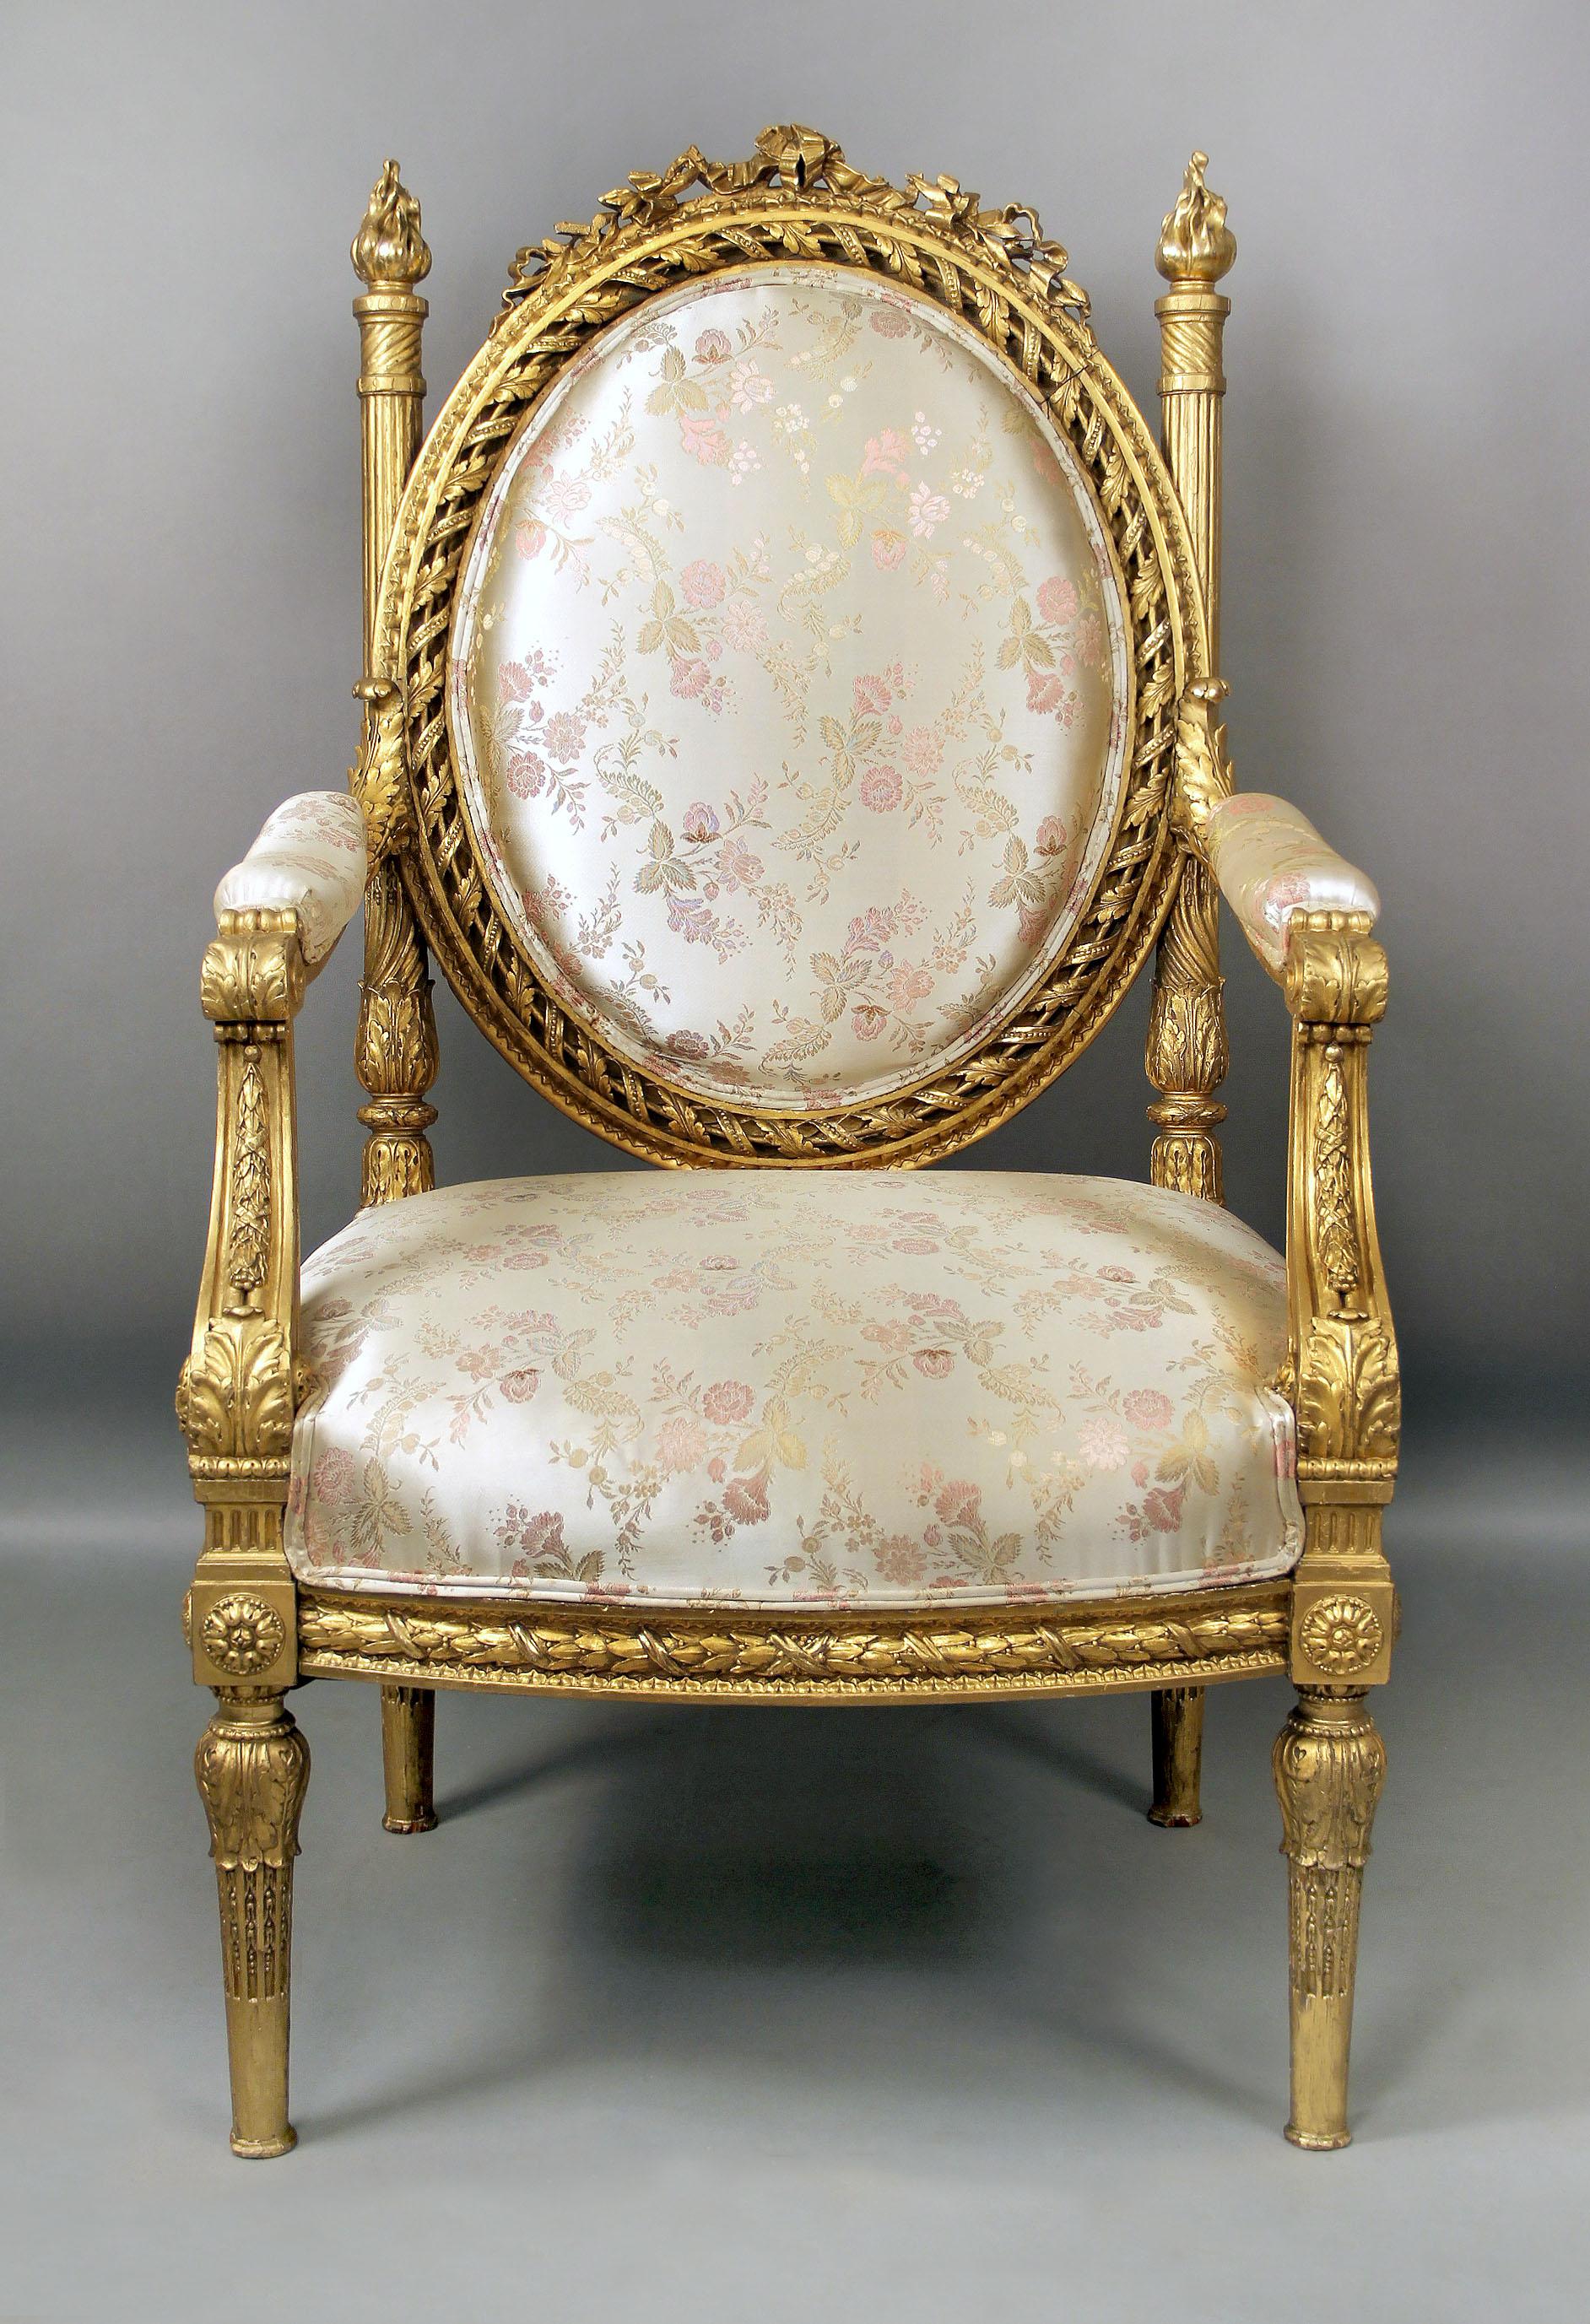 A large and very impressive late 19th century Louis XVI style giltwood Throne chair.

The oval backrest finely carved with pierced spiral frame suspended from two spiral-fluted spindles leading to flames, the seat rail carved with laurels and